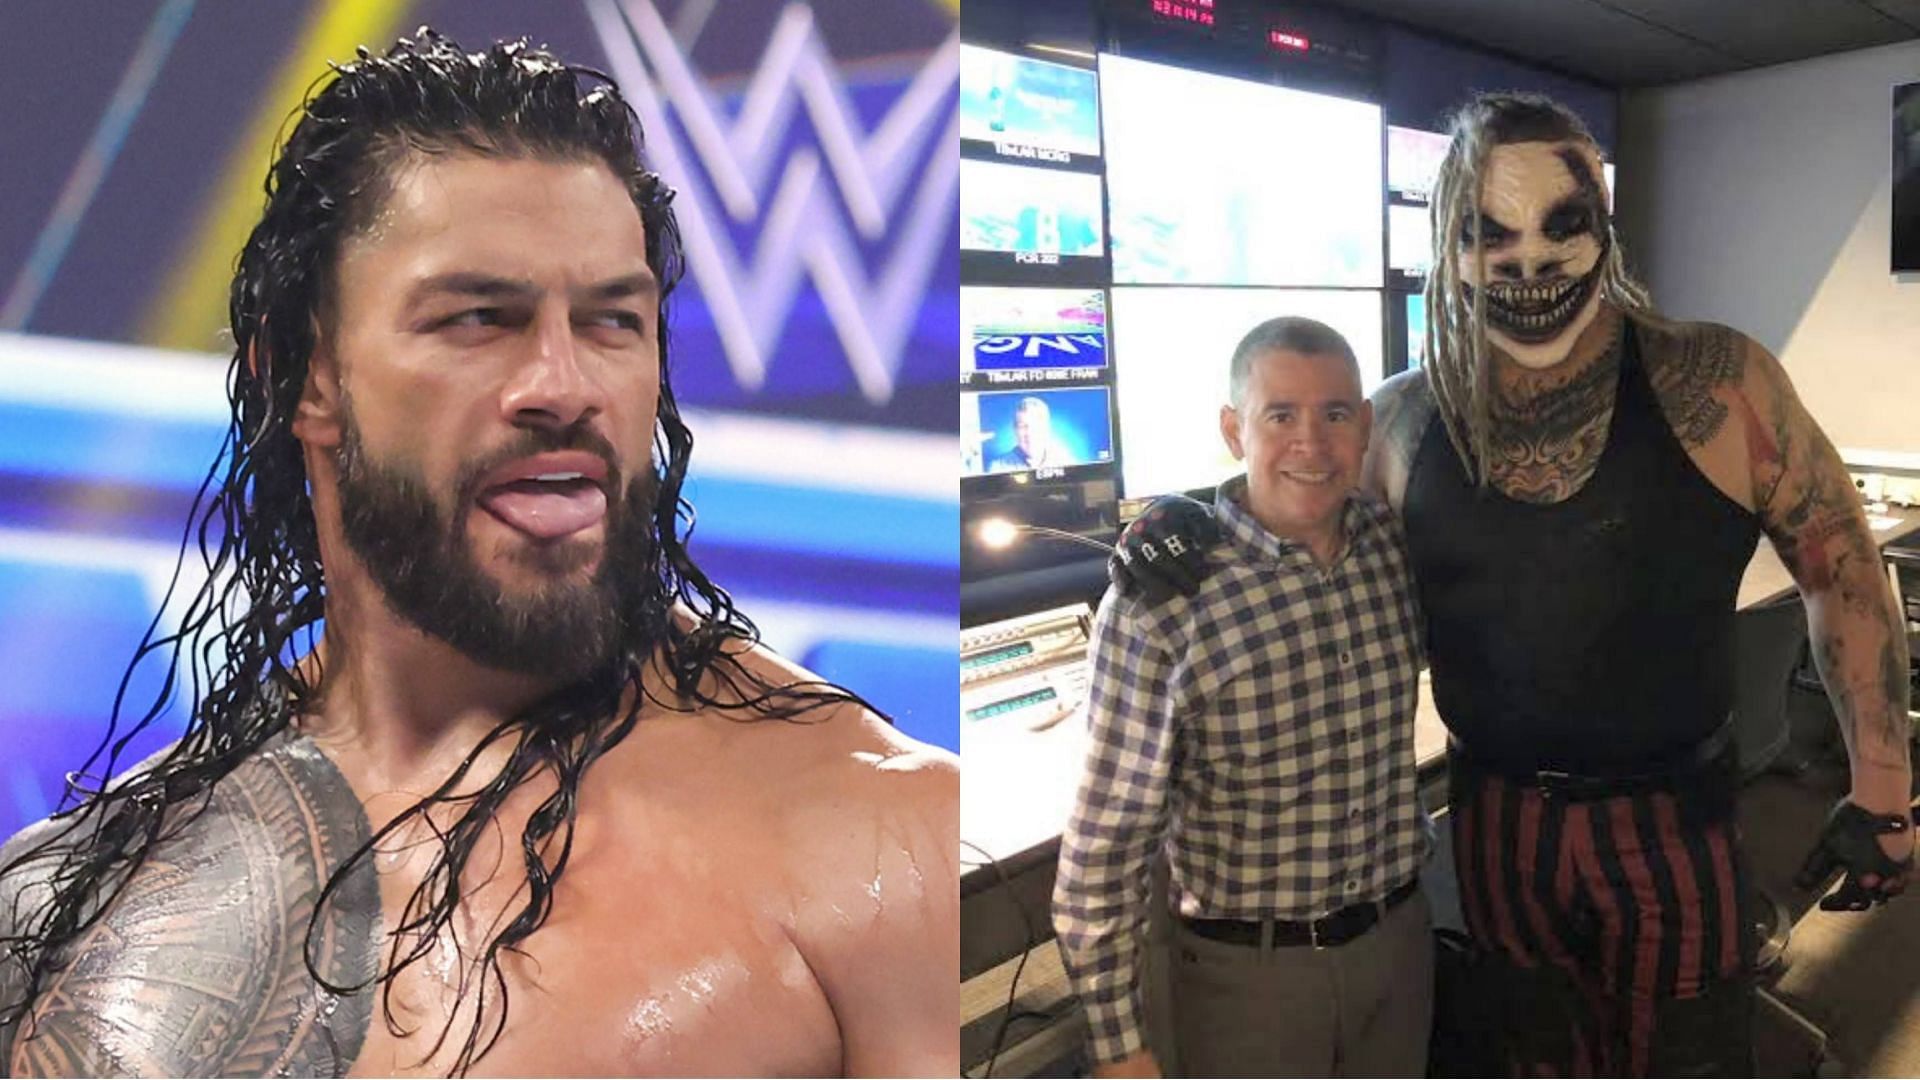 Roman Reigns (left); Bray Wyatt as The Fiend backstage (right)